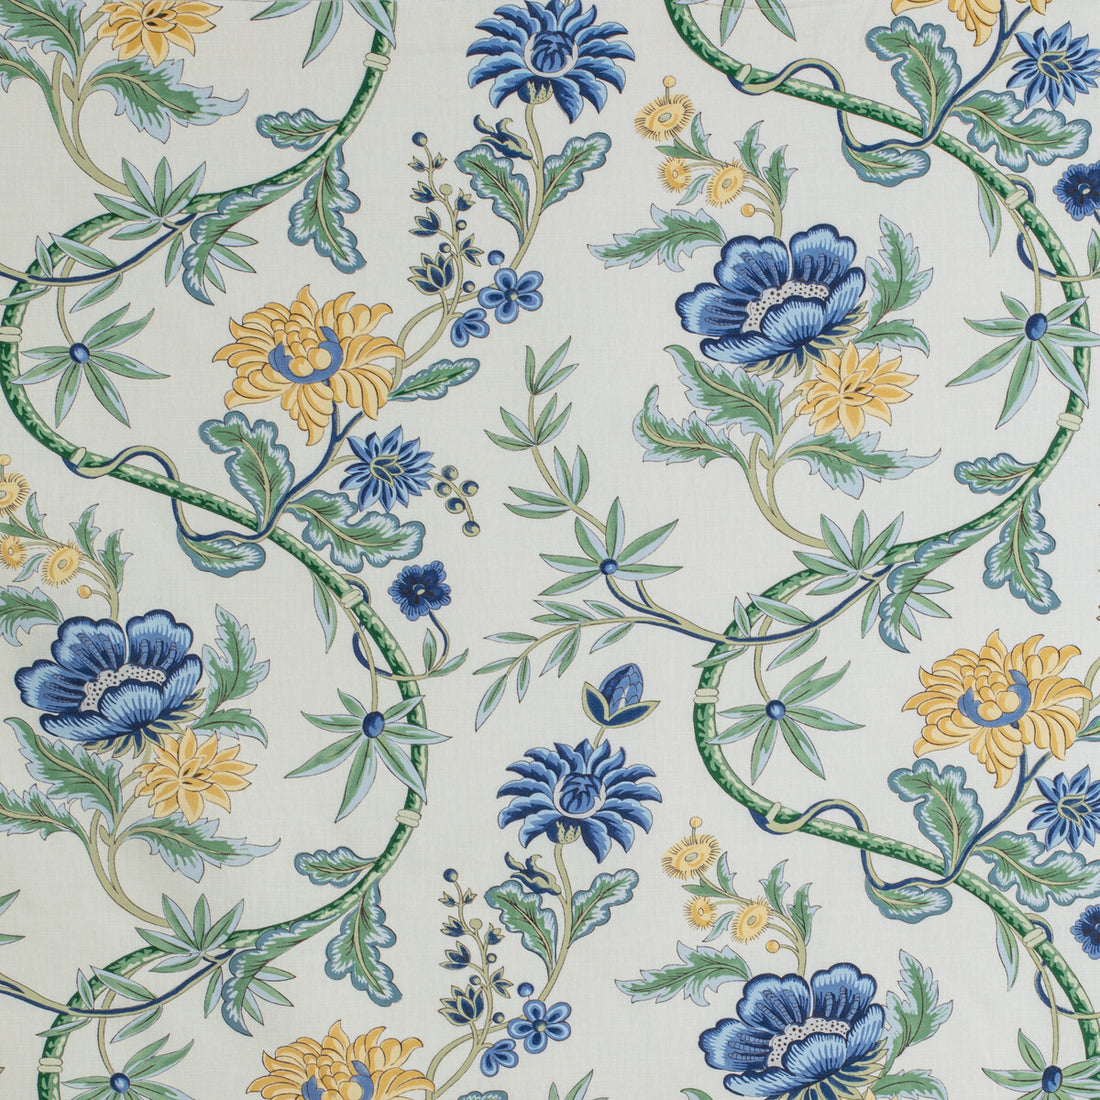 Veronique Print fabric in delft color - pattern 8020122.5040.0 - by Brunschwig &amp; Fils in the Louverne collection